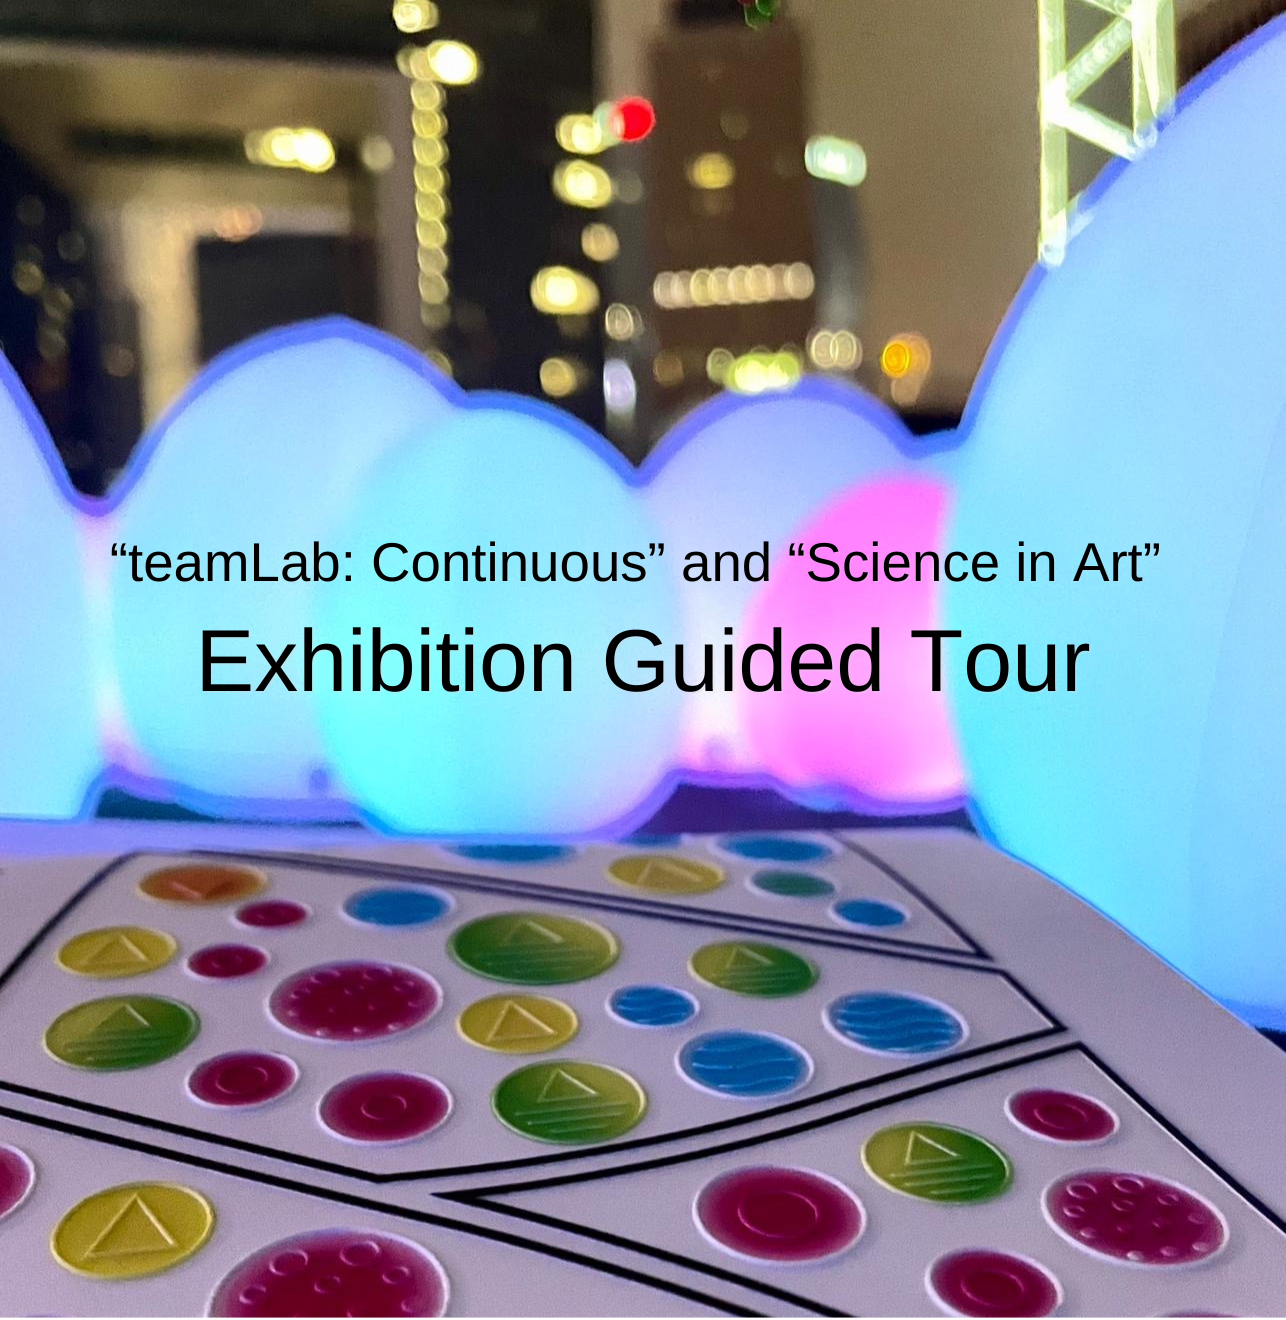 “teamLab: Continuous” and “Science in Art” Exhibition Accessible Guided Tour photo